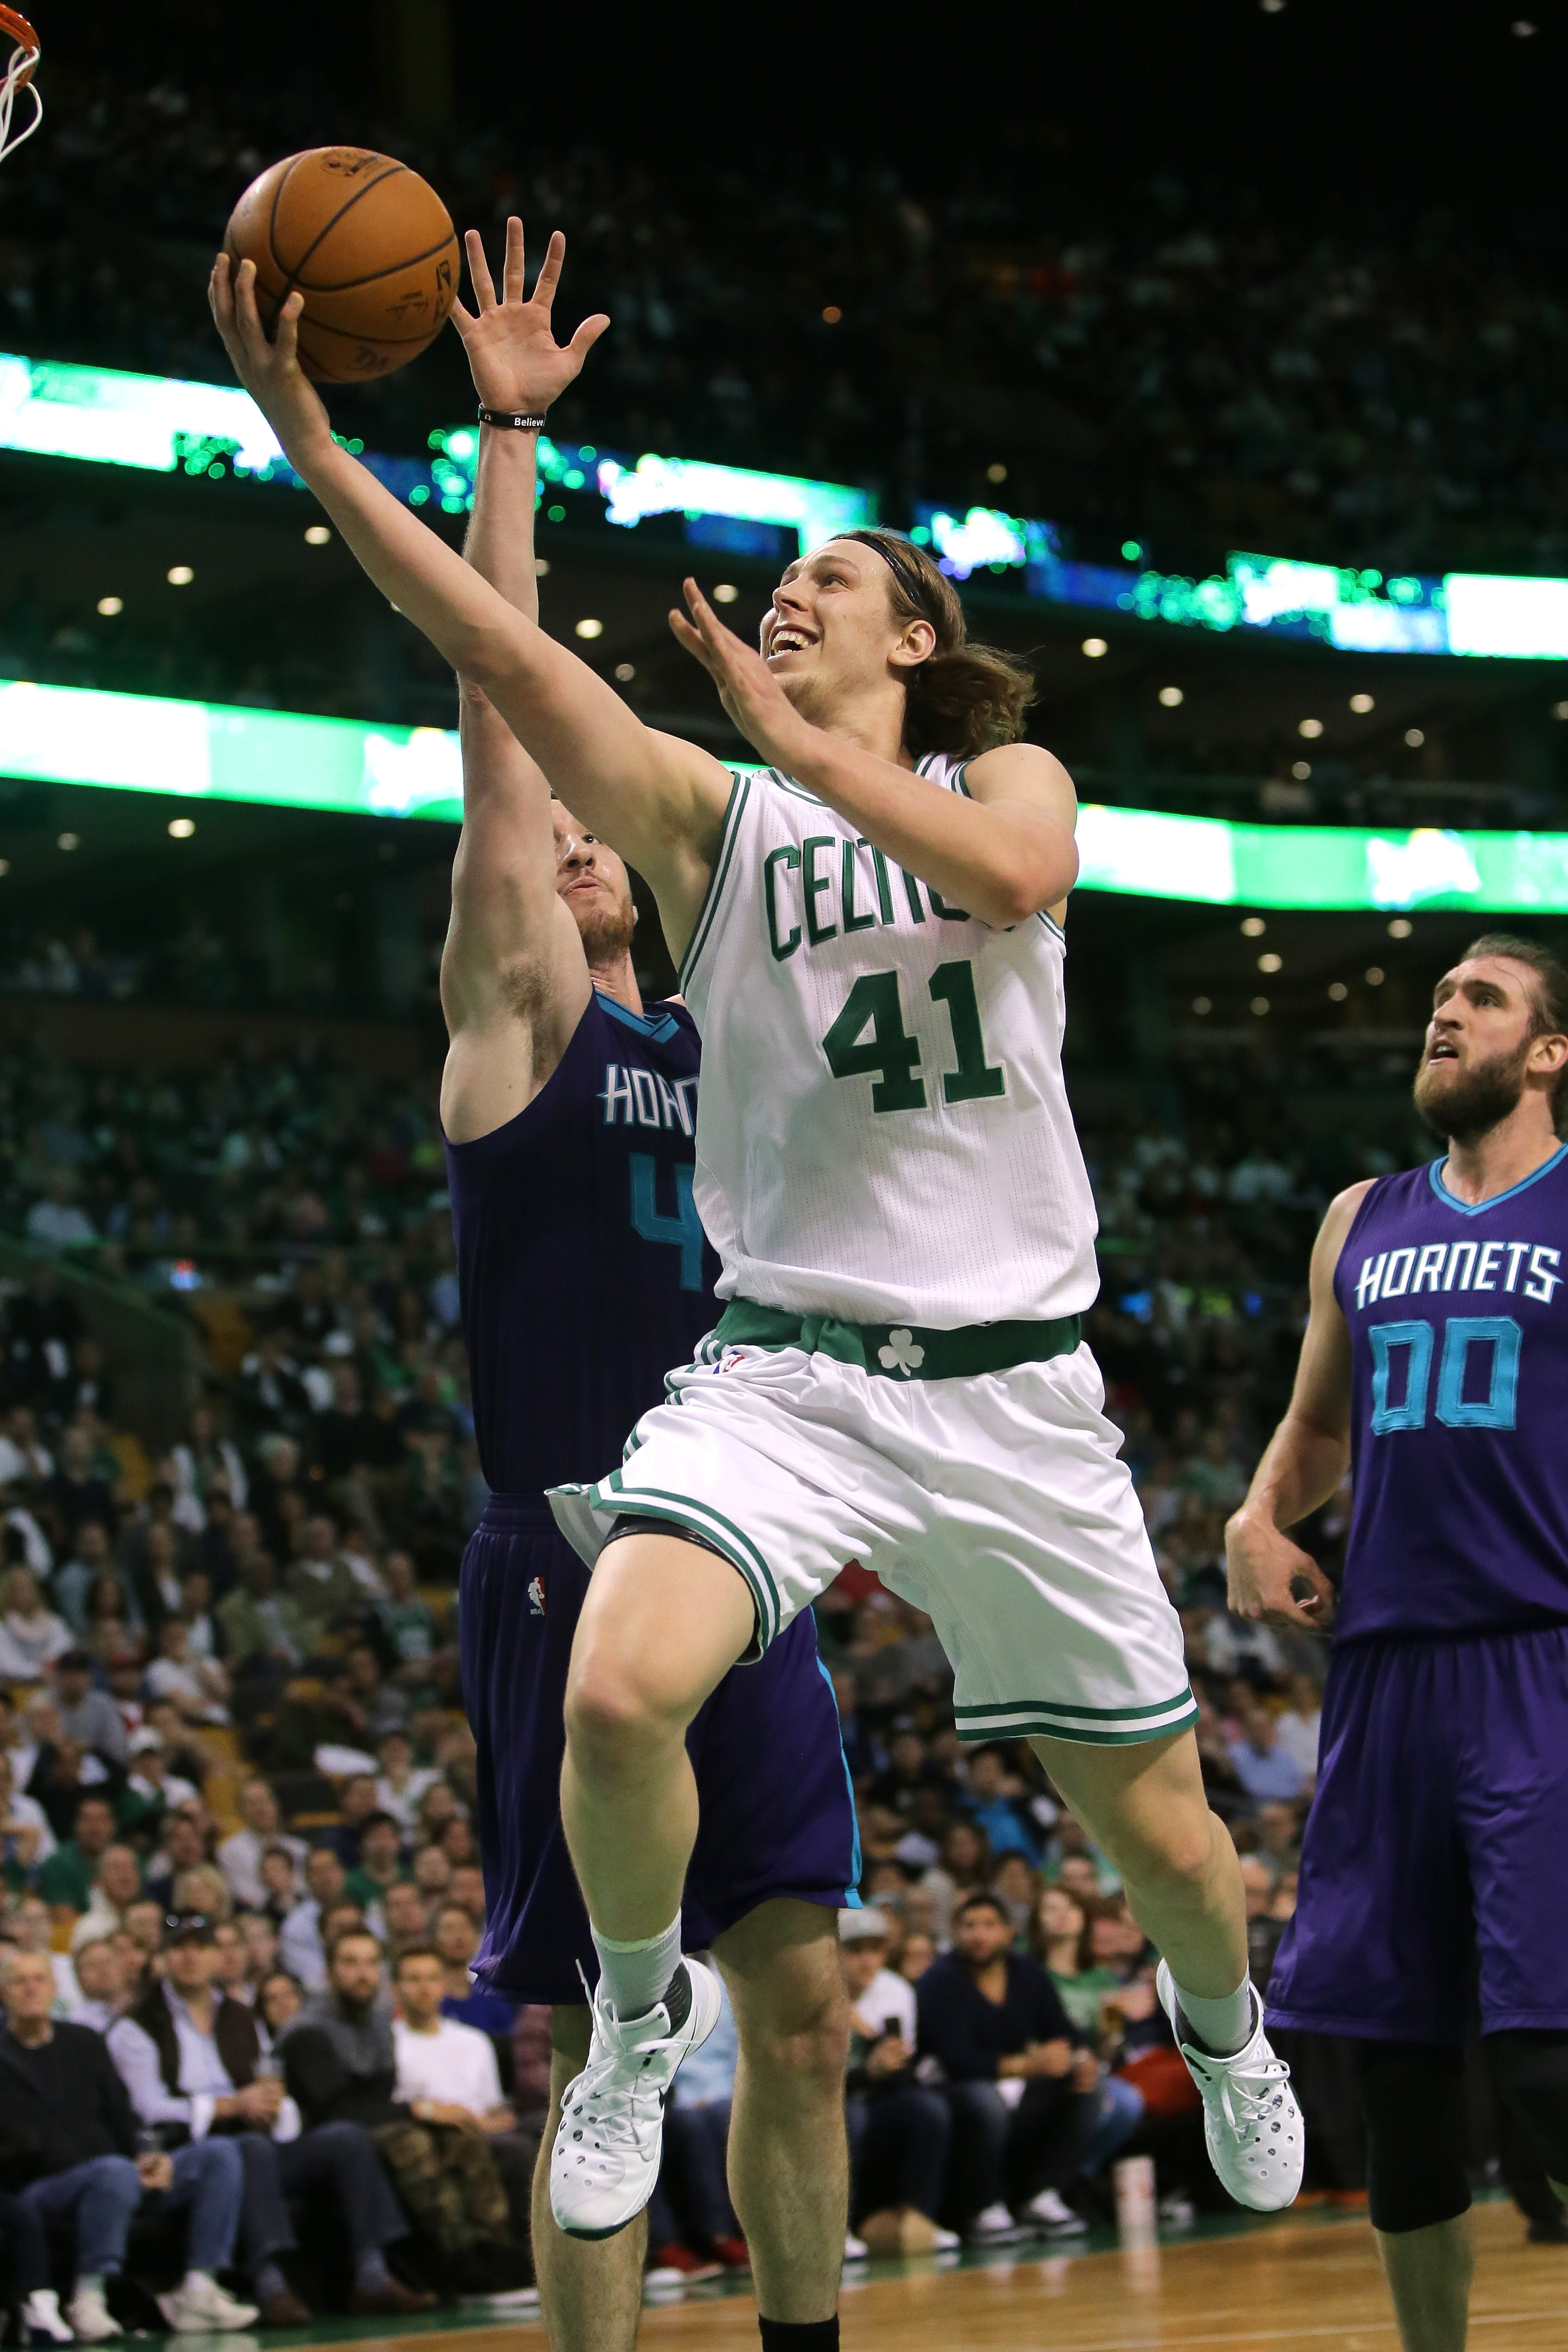 Should Kelly Olynyk be re-signed?